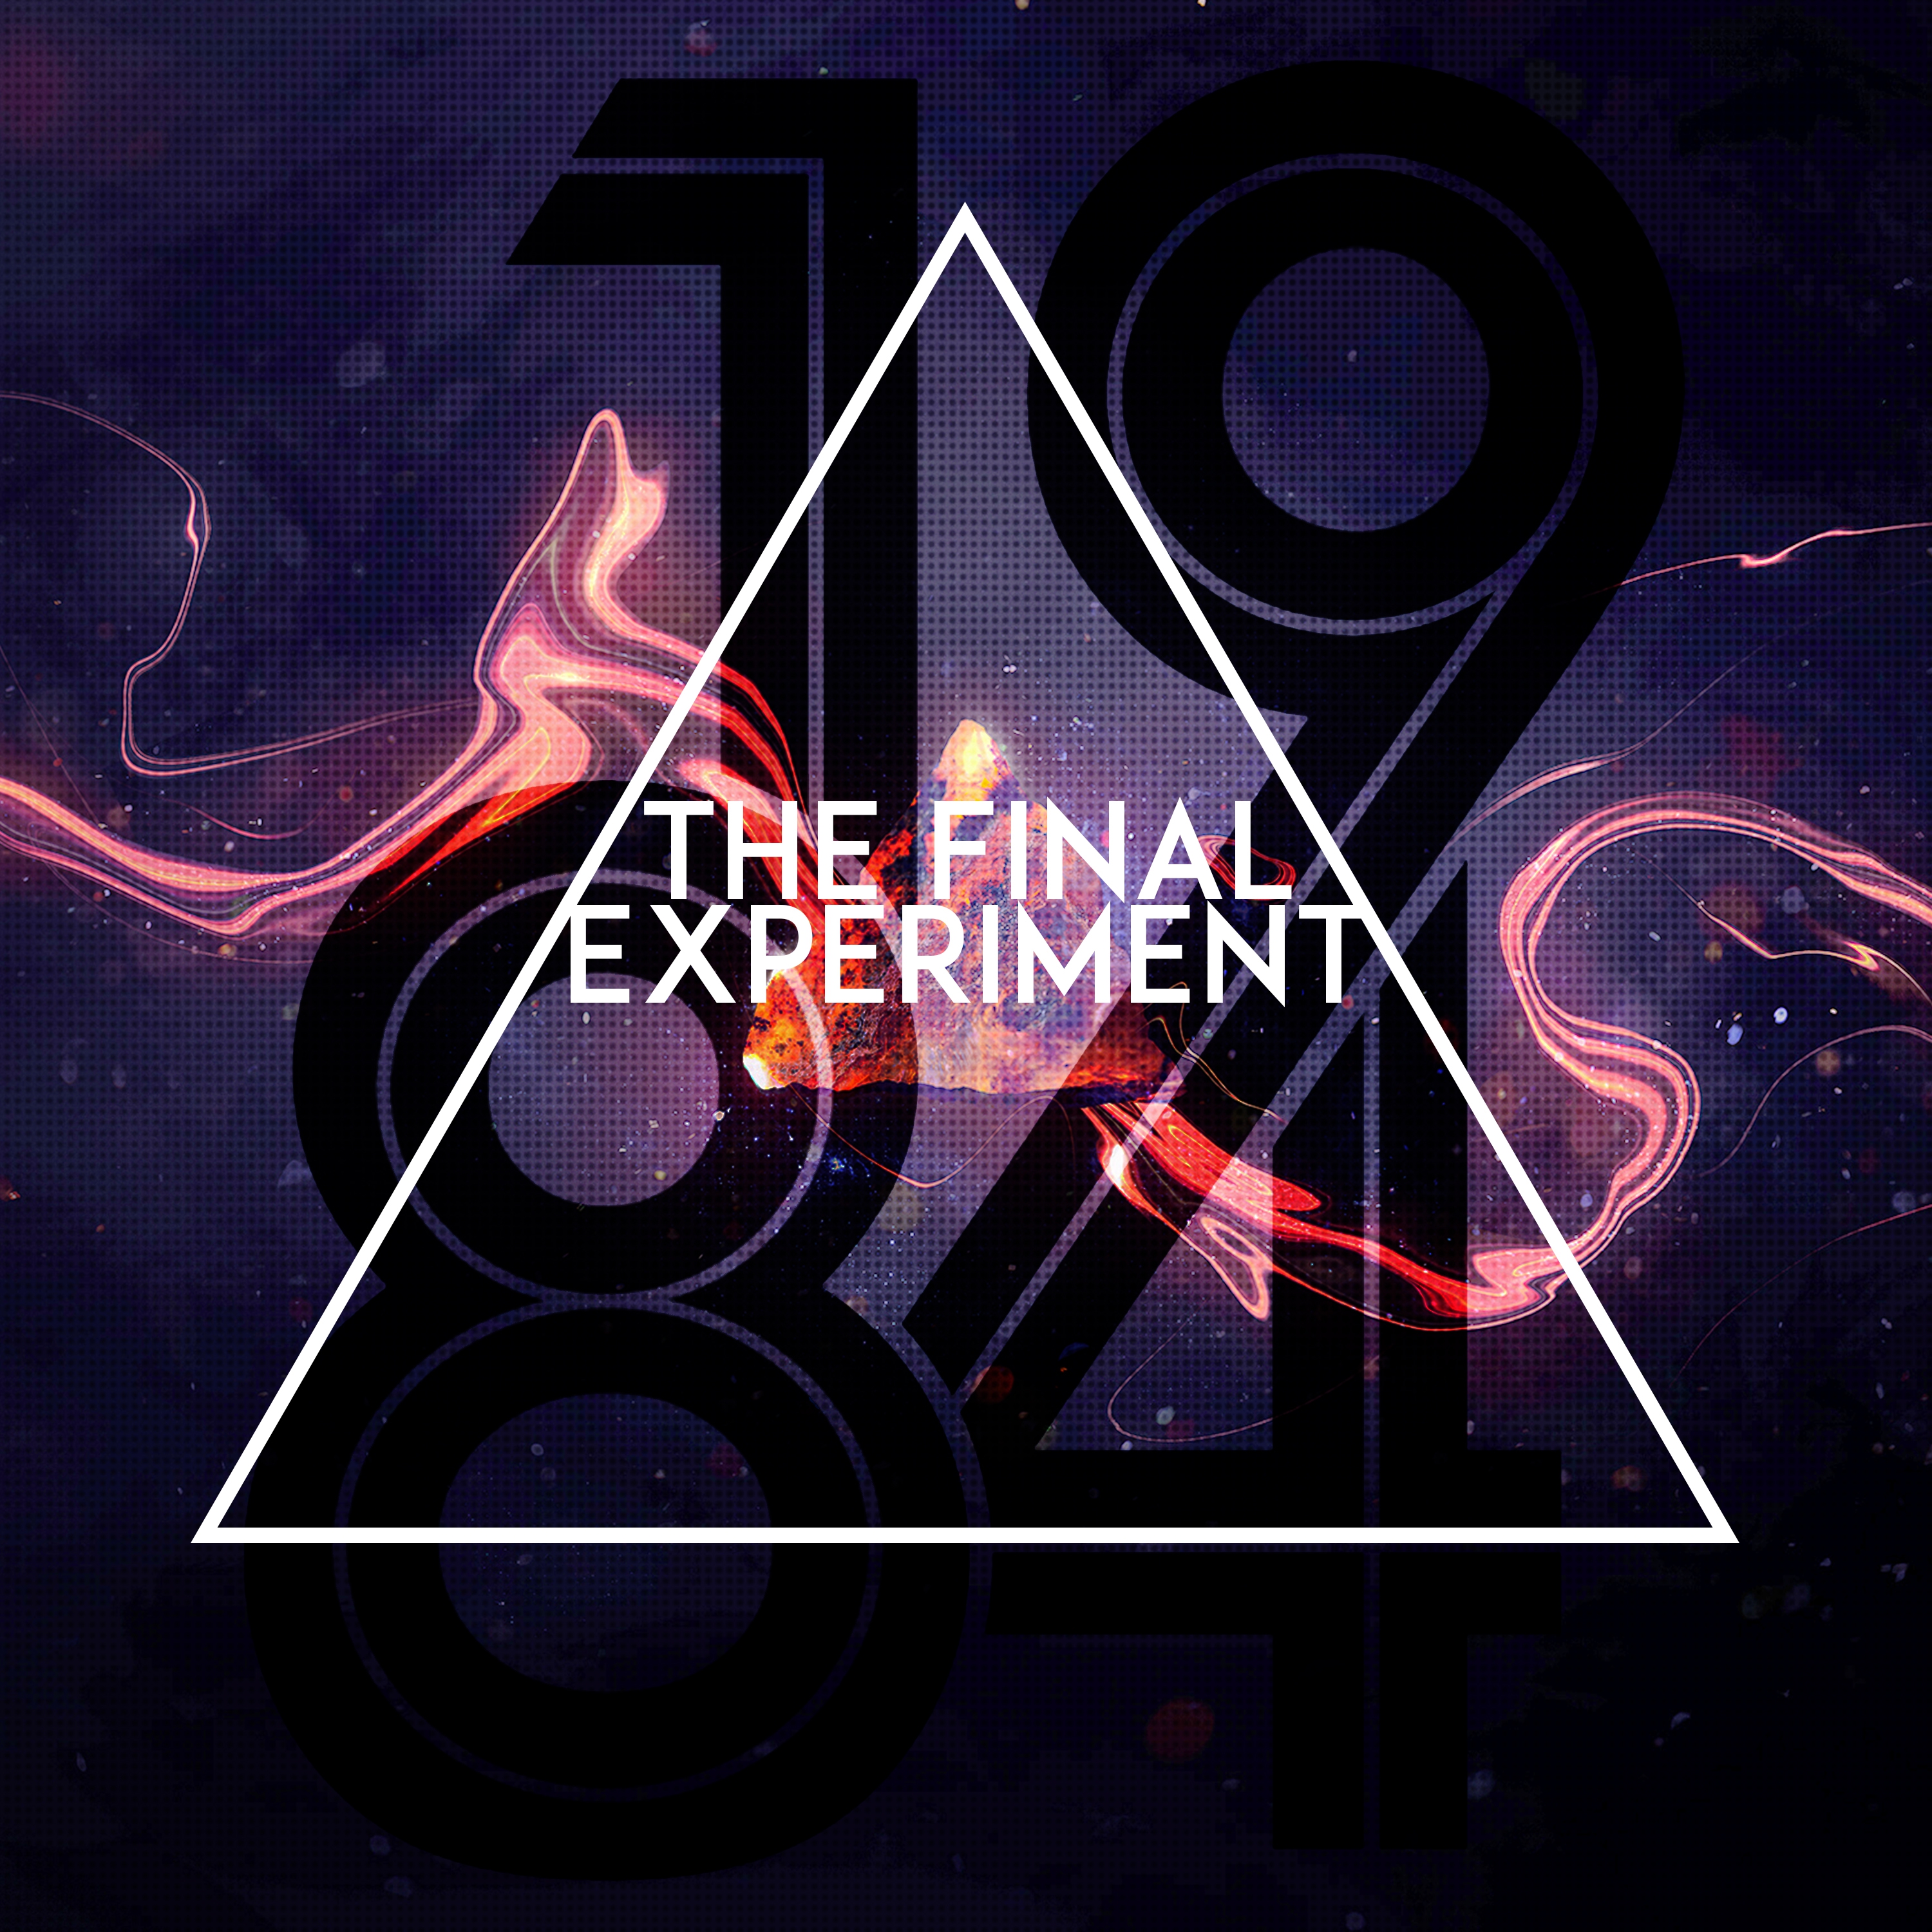 The Final Experiment